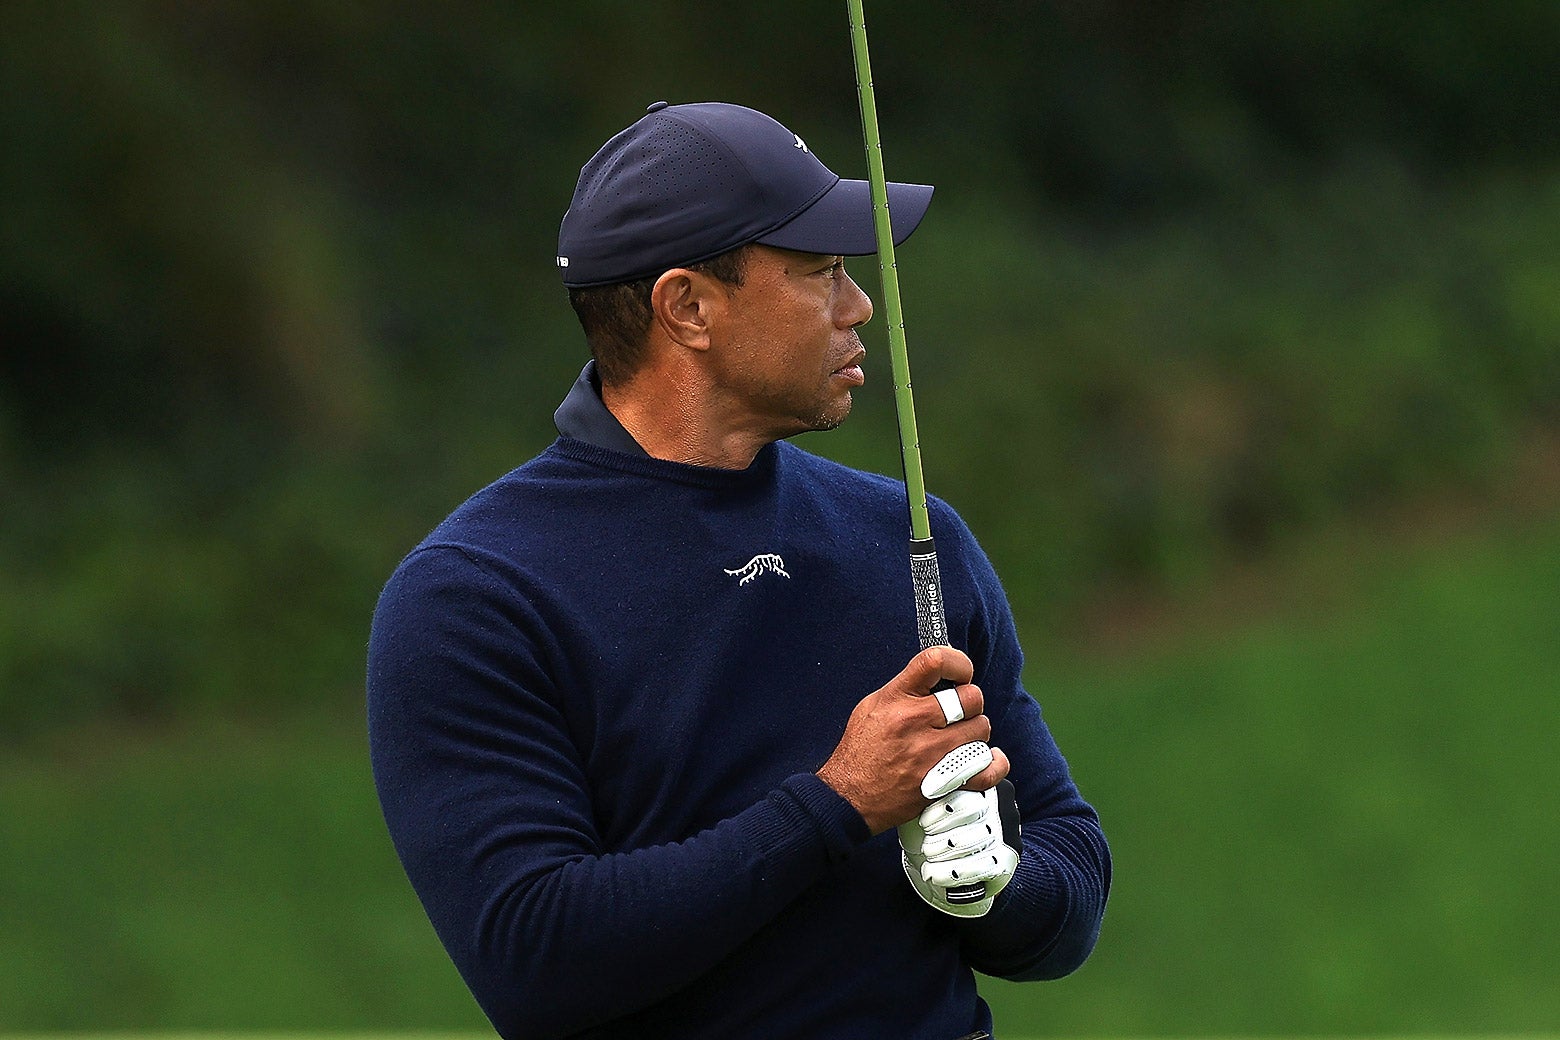 Tiger Woods holds his club upright in front of him and gazes down the hole.